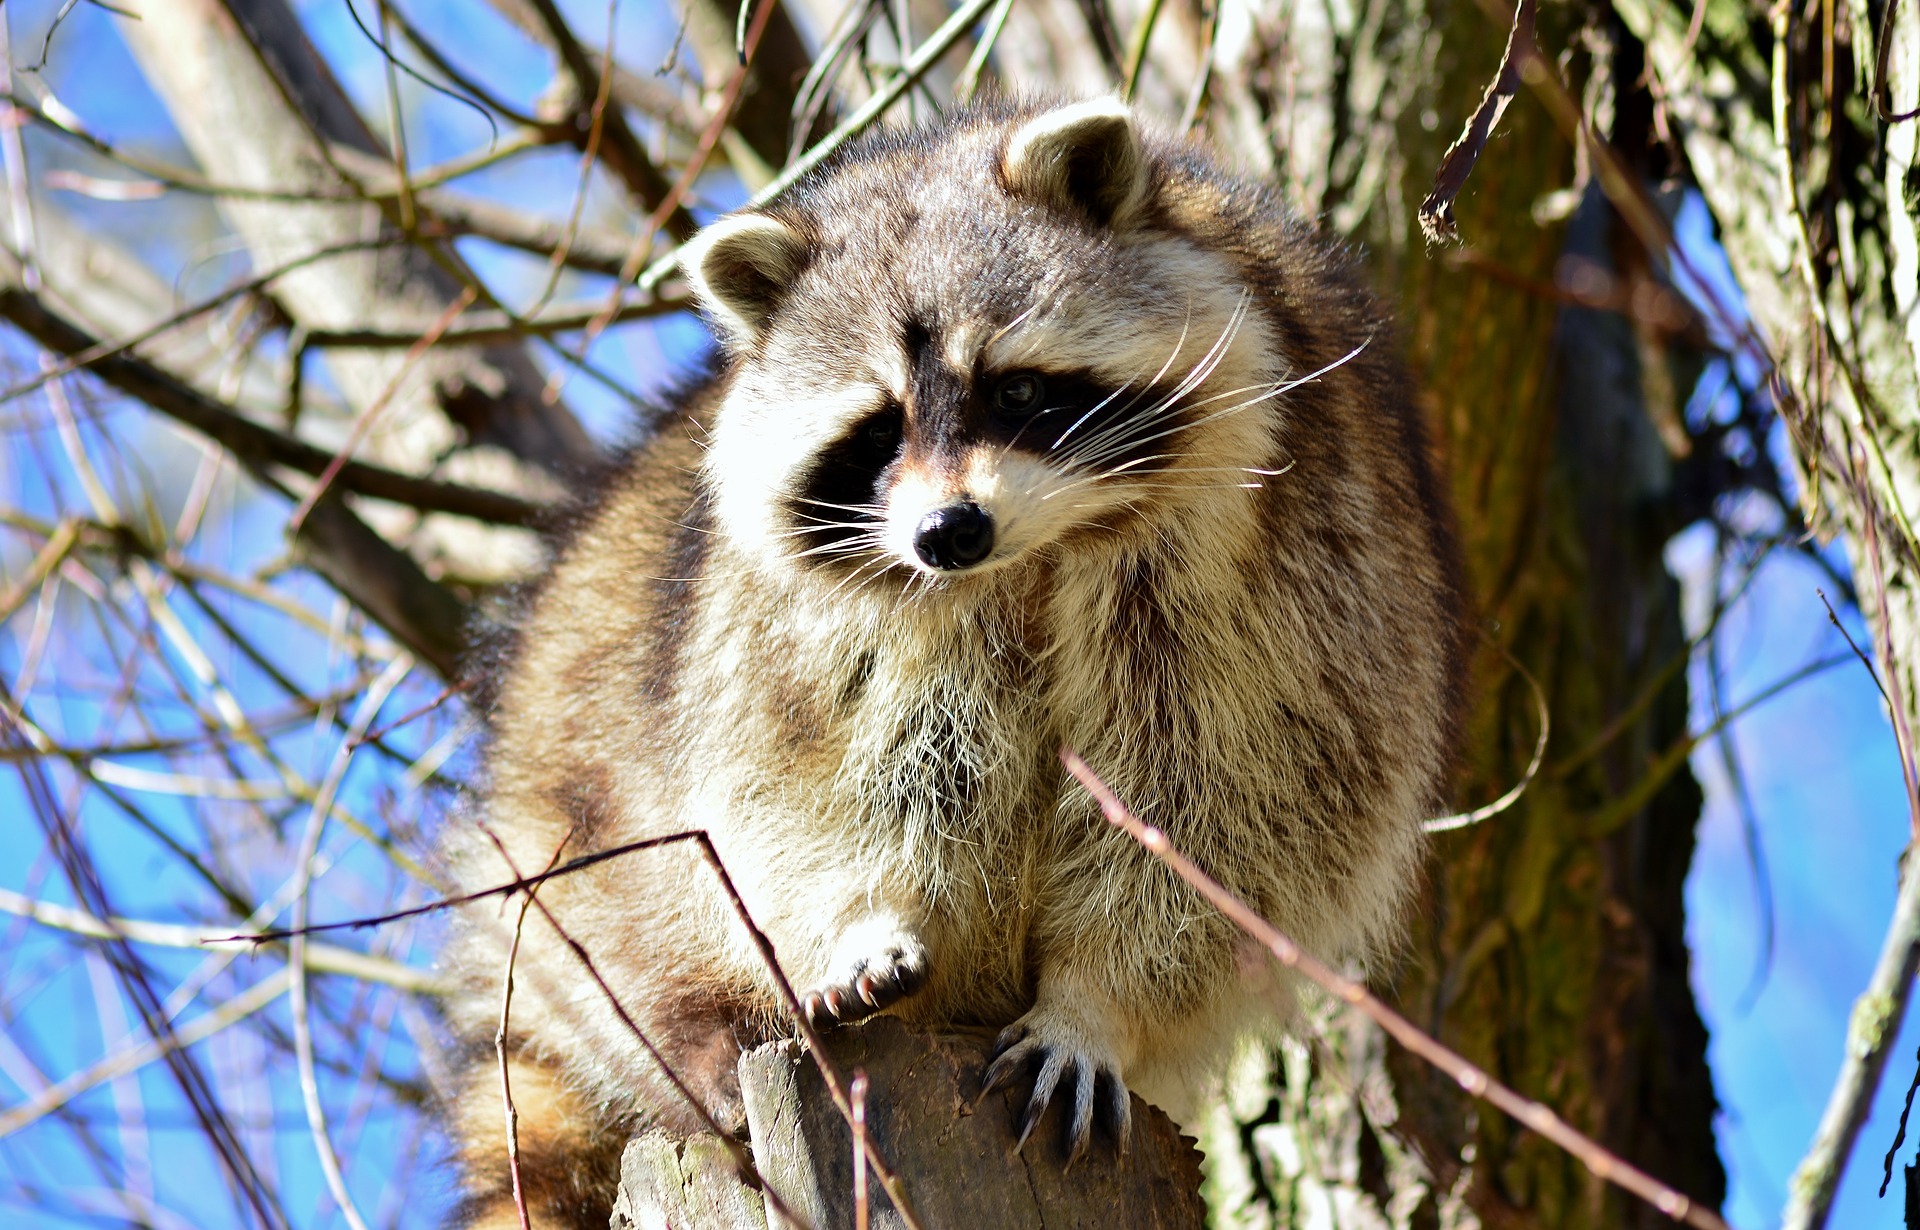 Raccoon perched on a fence post